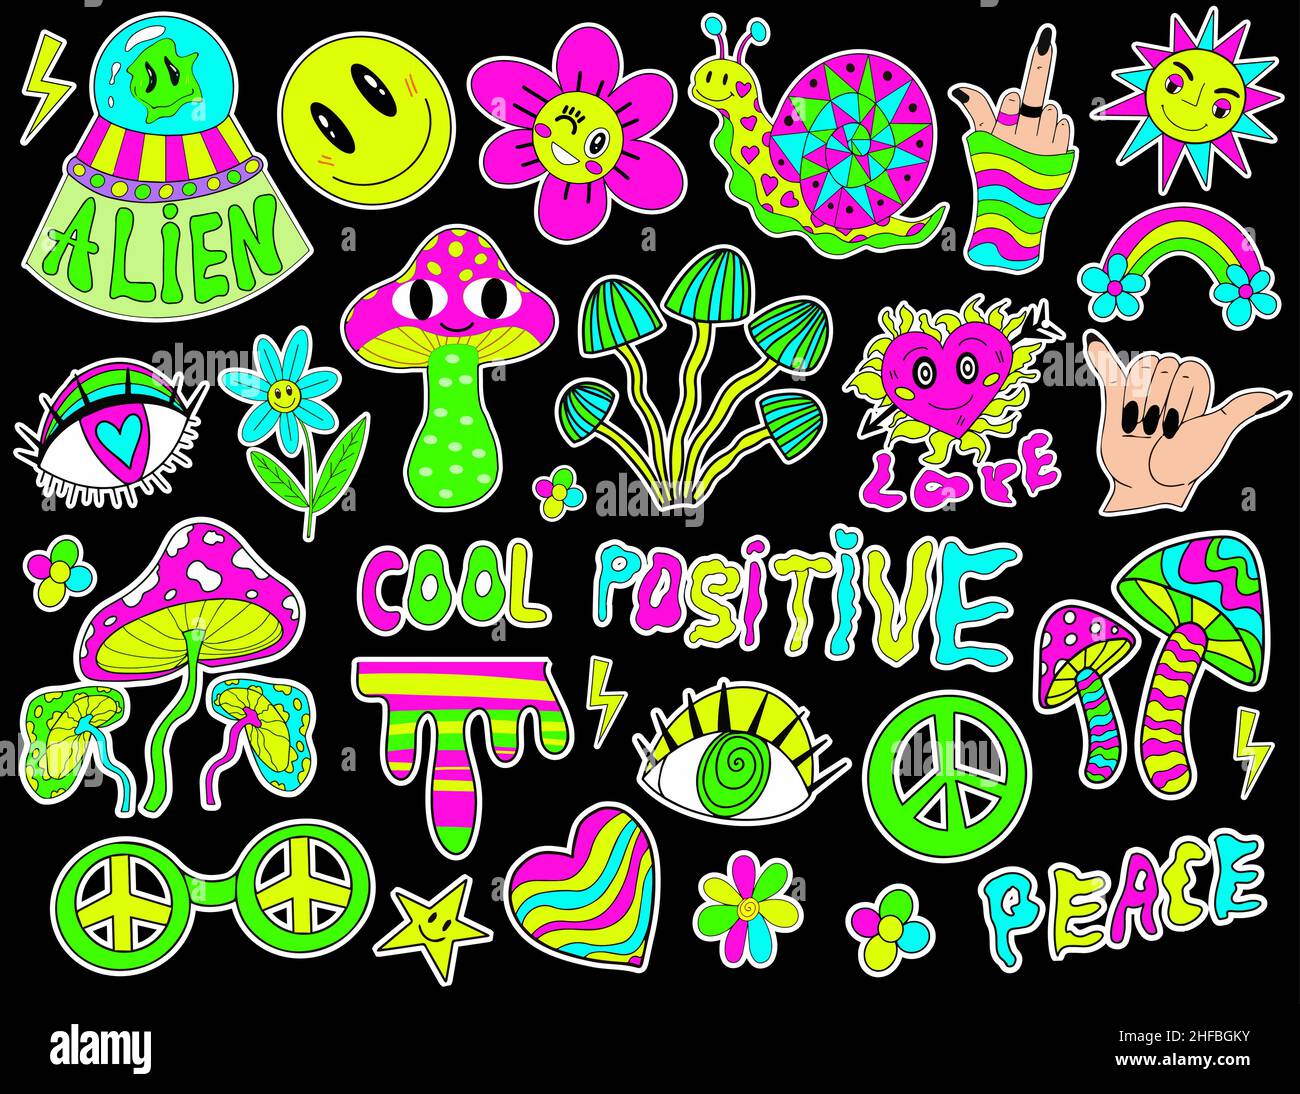 Psychedelic Hipster Set Retro 70s Hippie Stickers Groovy Elements Cartoon Funky Flowers